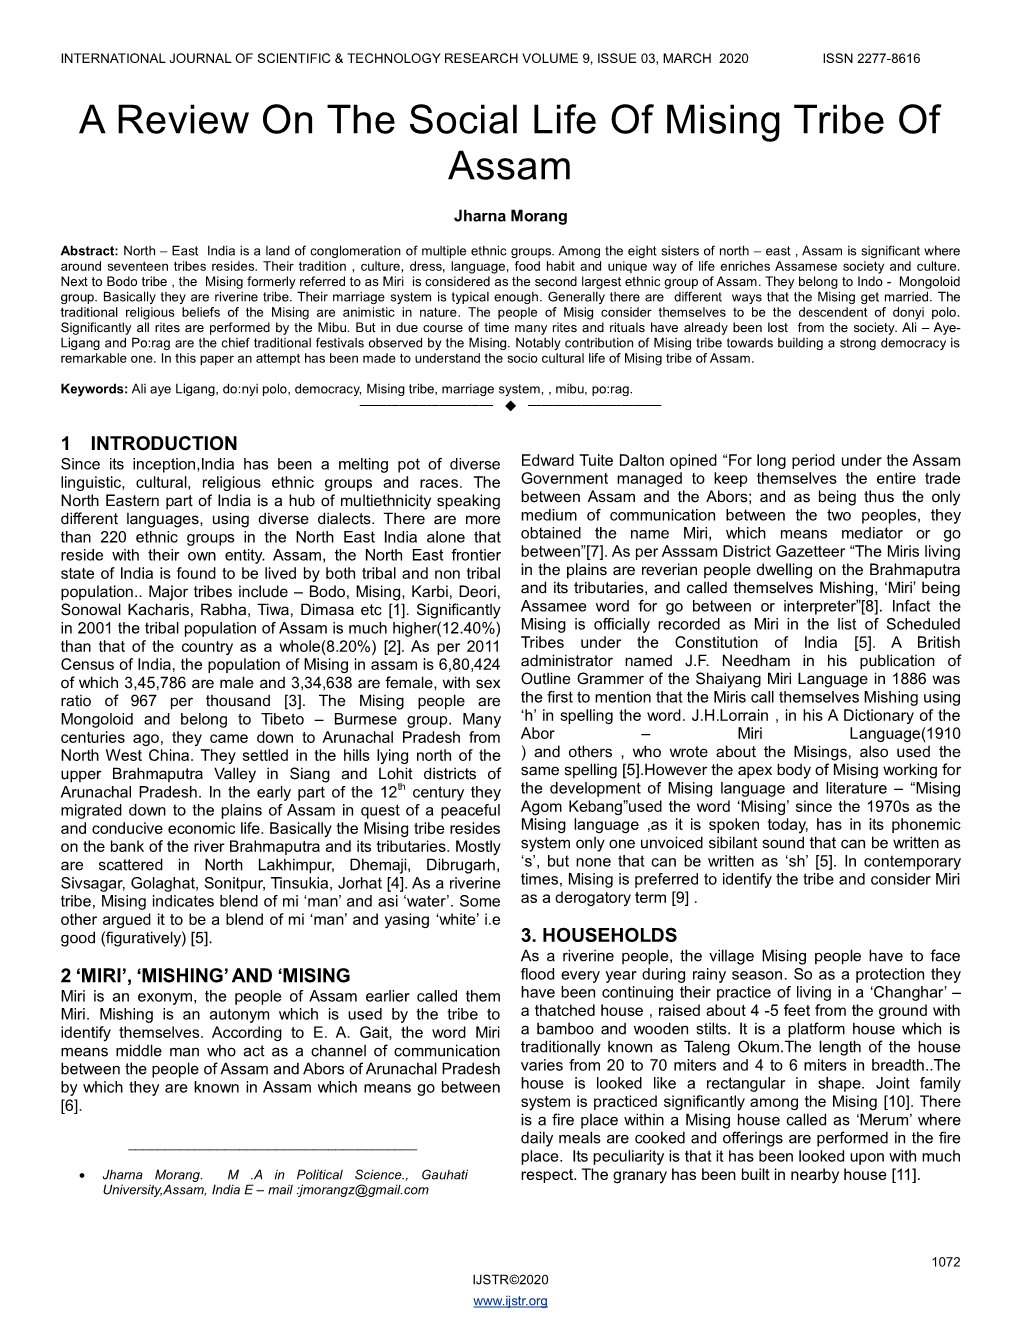 A Review on the Social Life of Mising Tribe of Assam